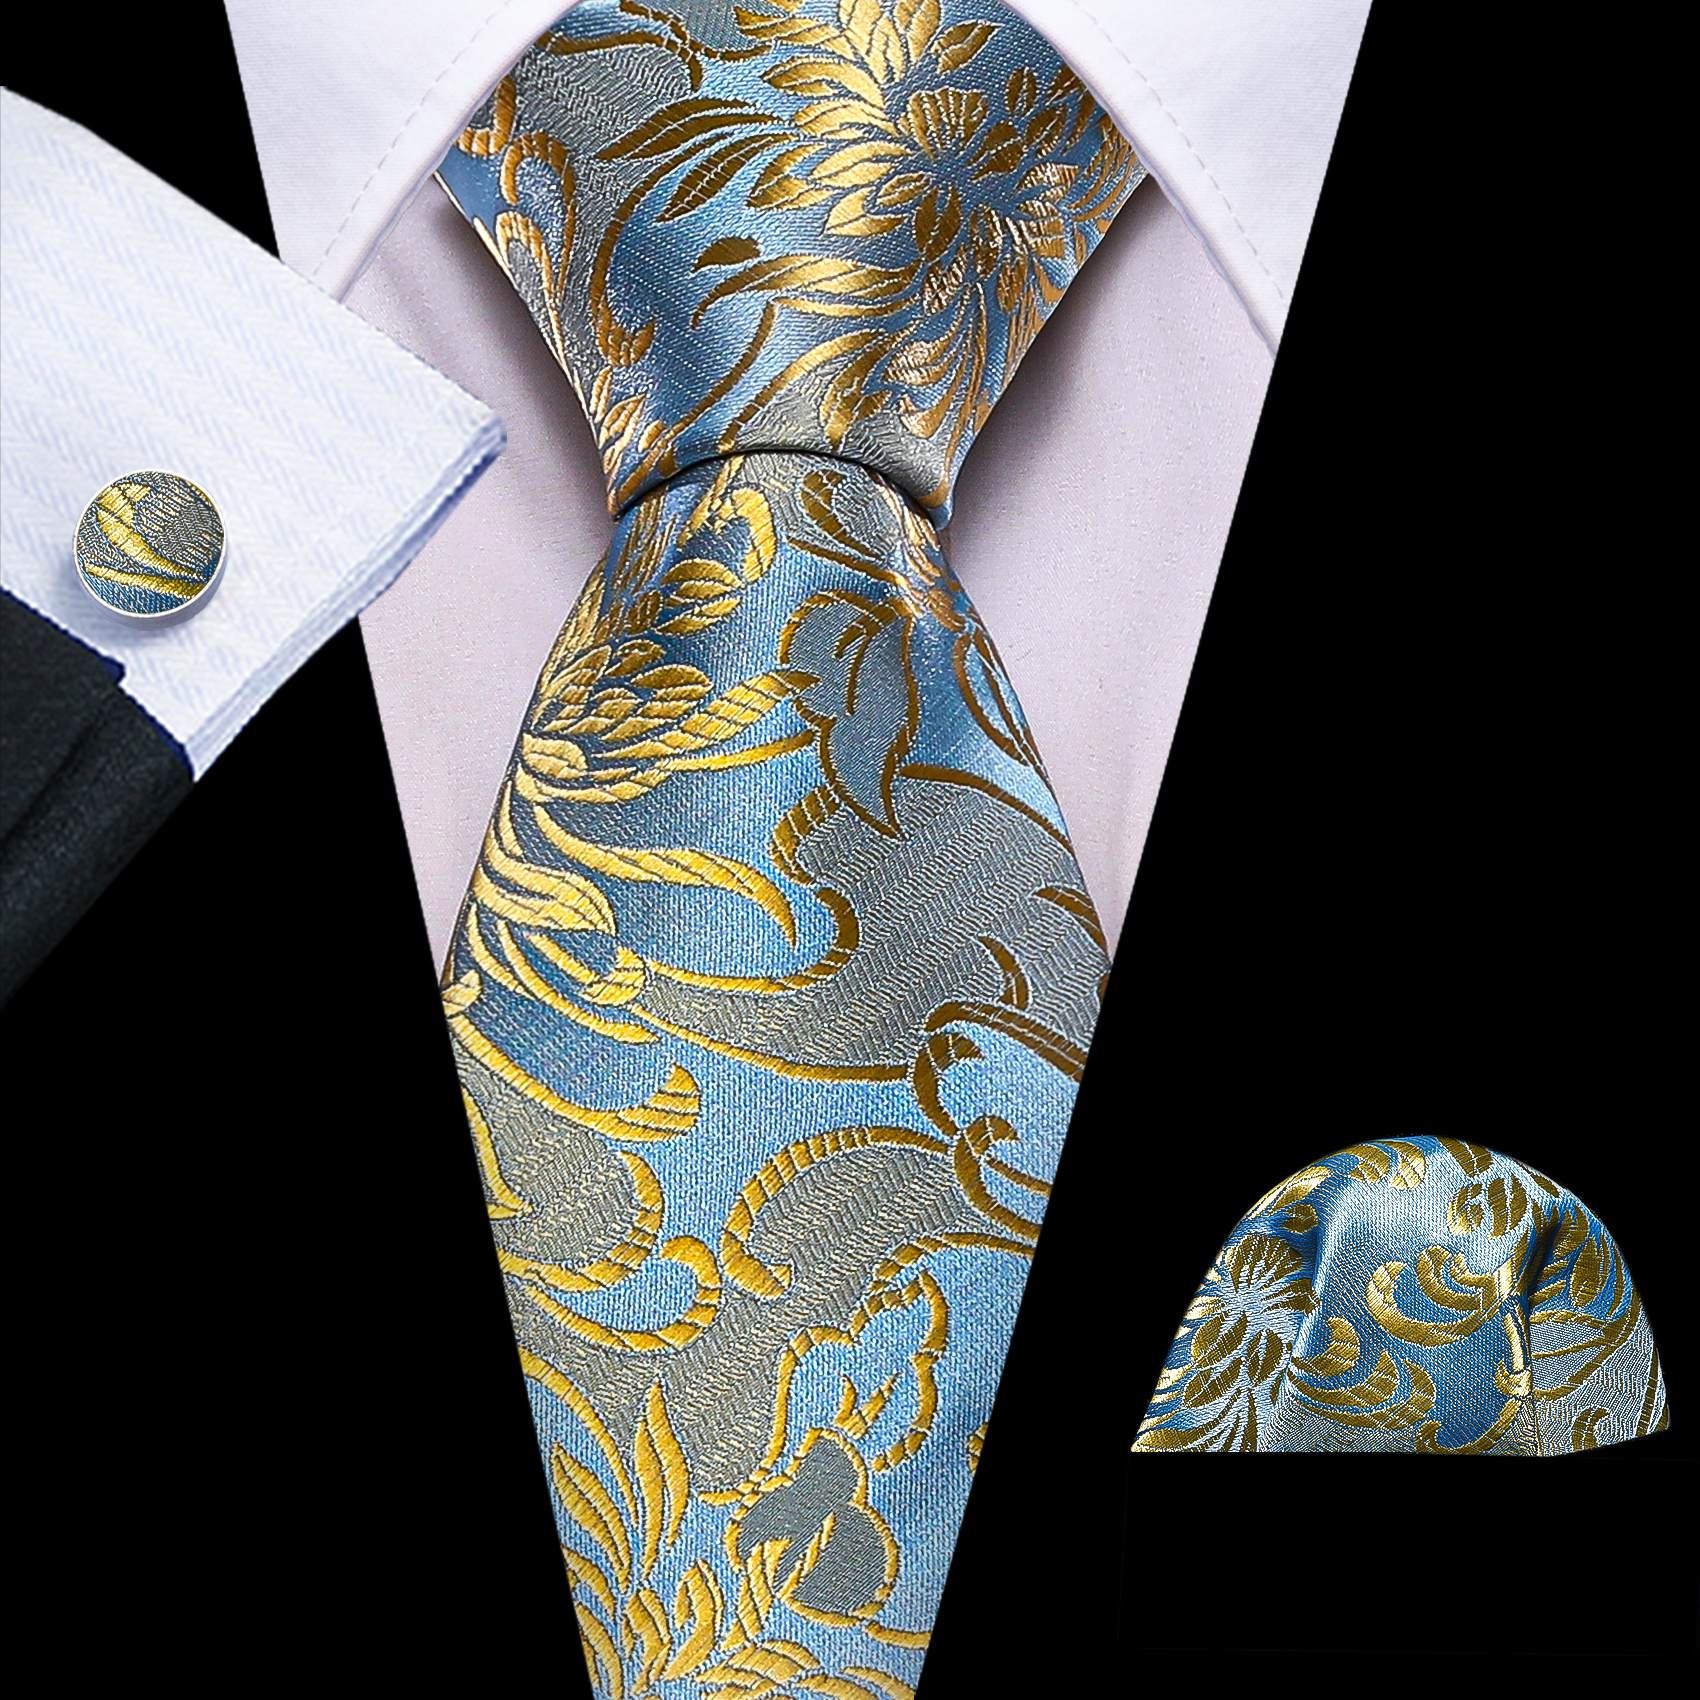 Exquisite Folral Teal Men Tie High Quality Silk Pocket Square Cufflinks Sets Elegant Jacquard Necktie Wedding Party Barry.Wang